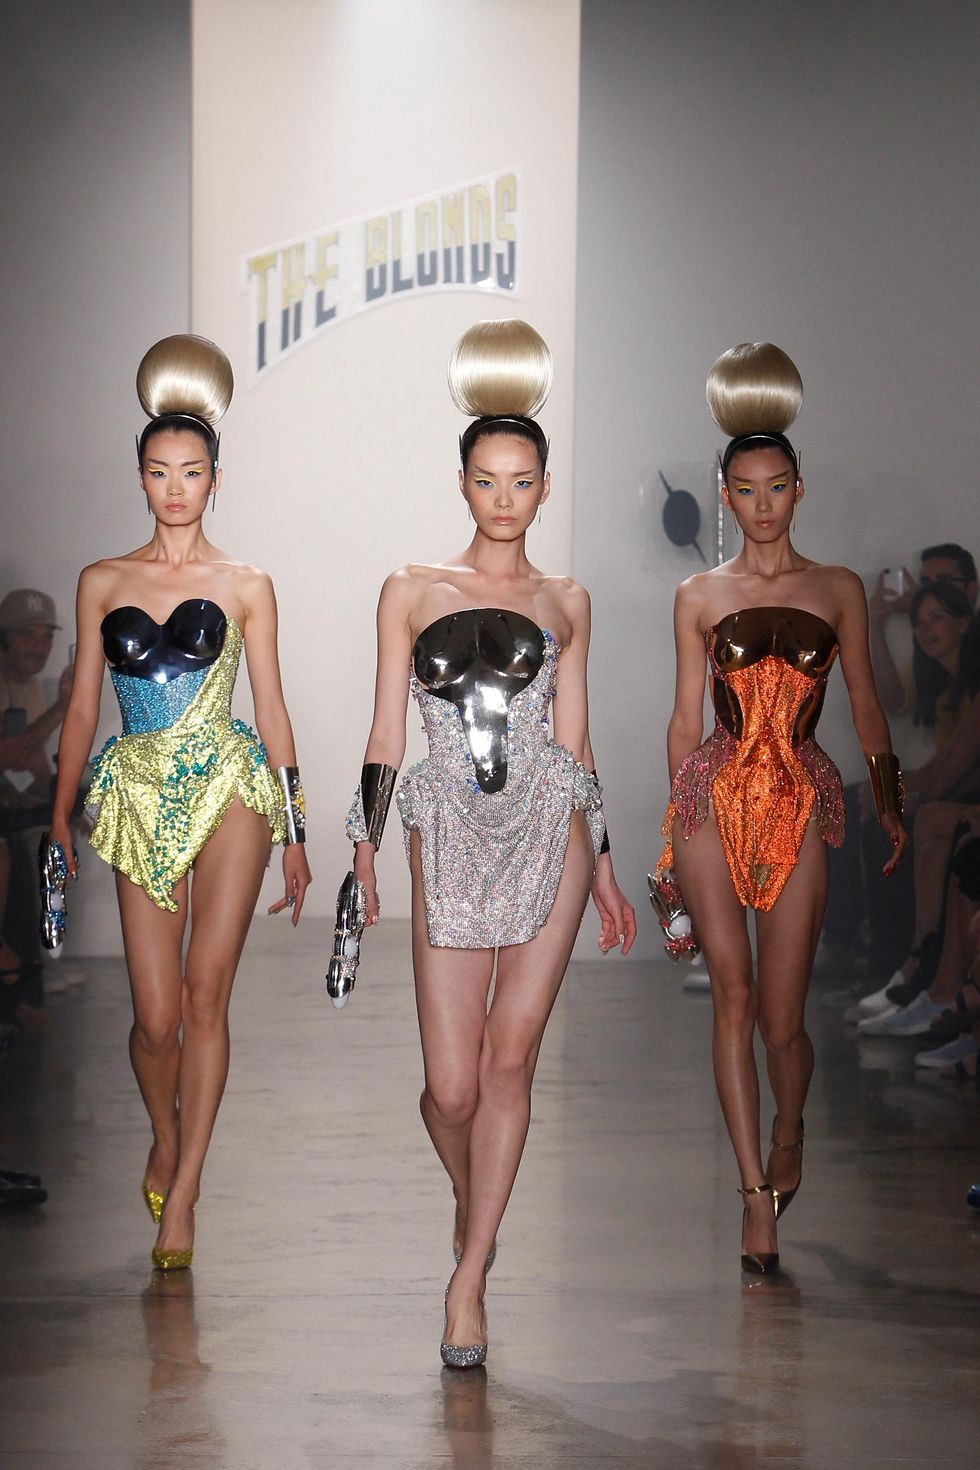 The Blonds runway show, fashion week, Sept 2013